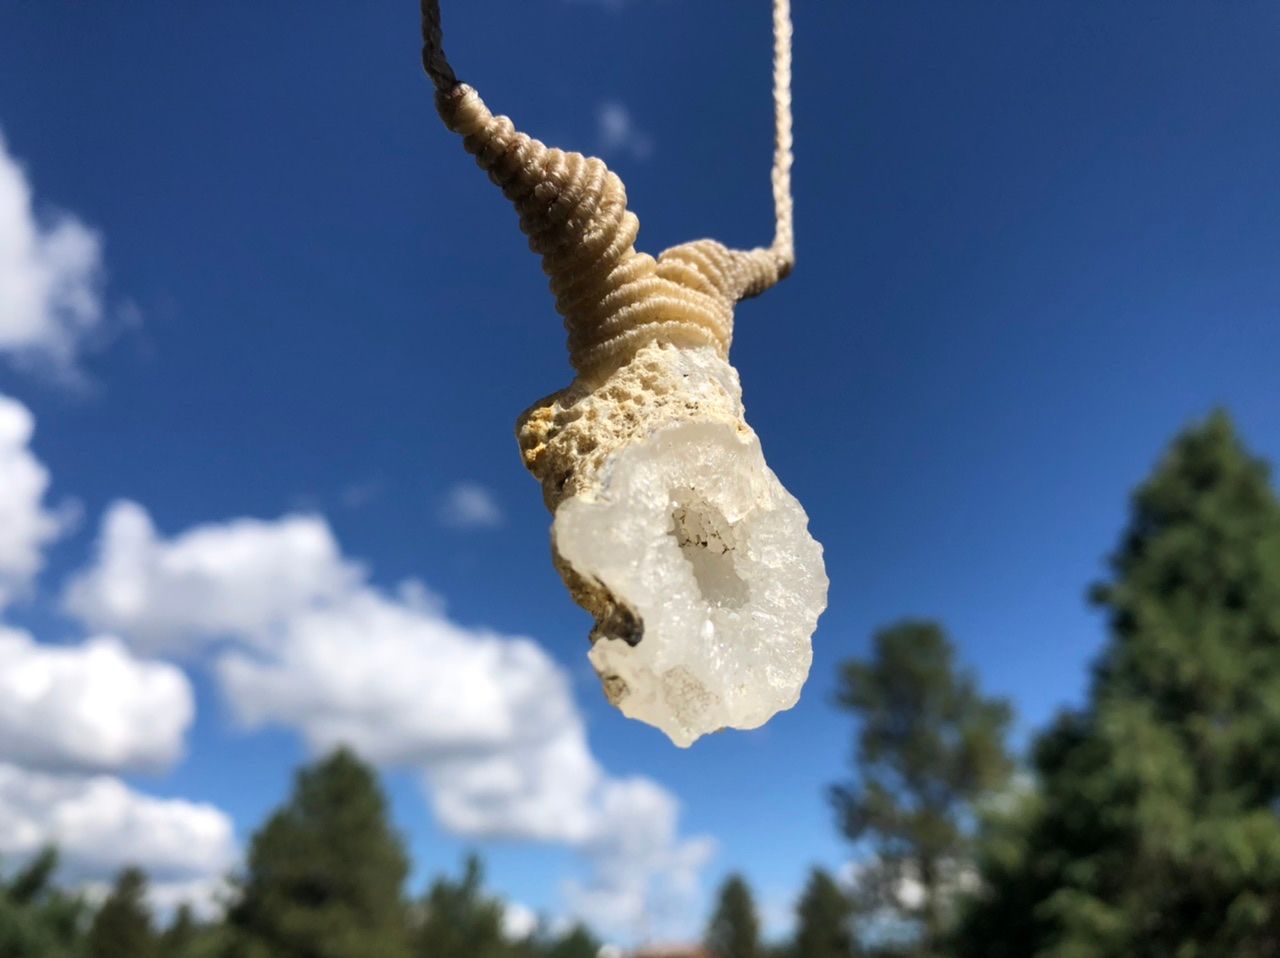  a white thread and crystal necklace Hangs in front of a blue sky and pine trees